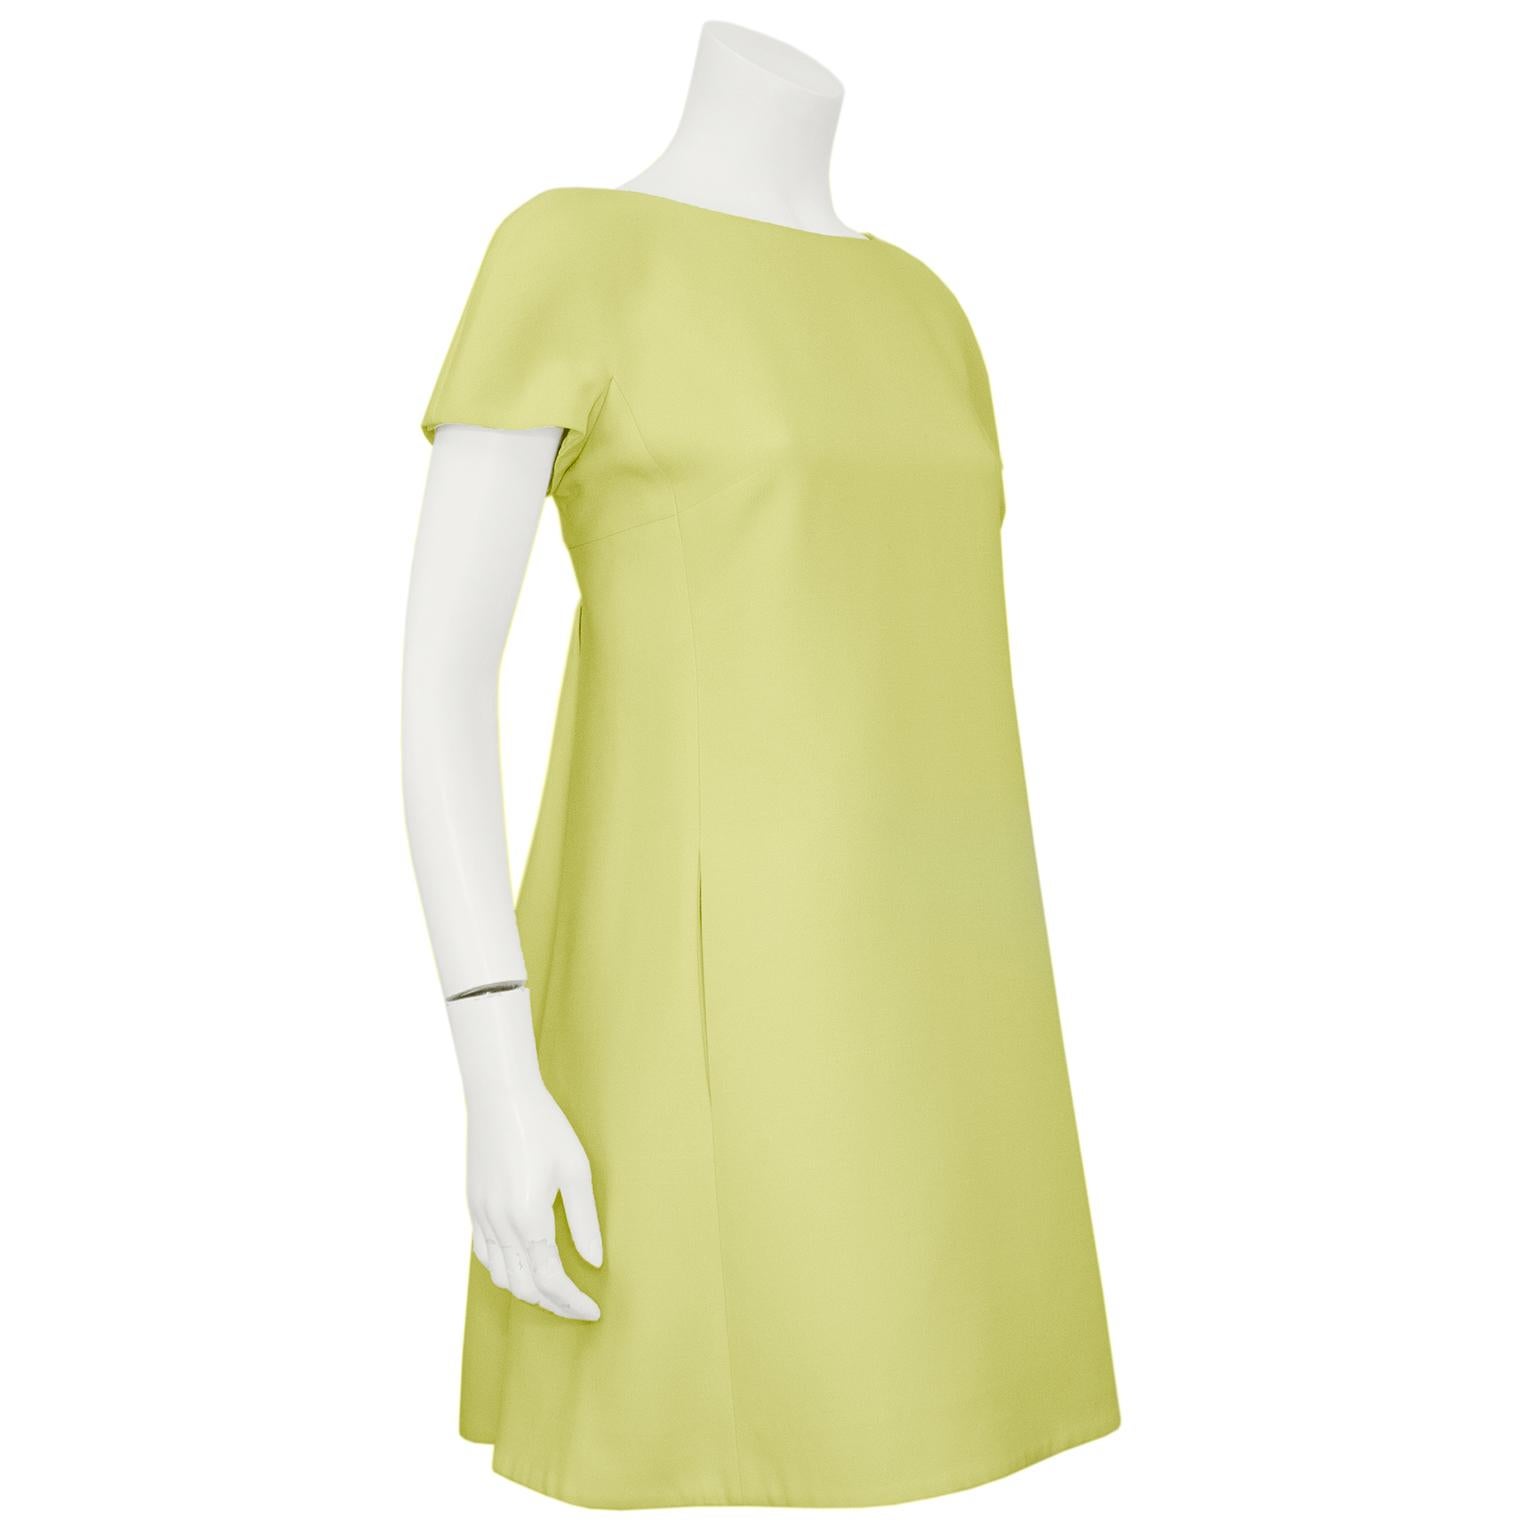 Super fun Valentino 1960's retro looking mini dress from the 1990s. Short cap sleeves with a boat neckline and an A-line shape. Darts at the bust and vertical slit pockets hidden in the front side seams. Square cut at the back with a large single